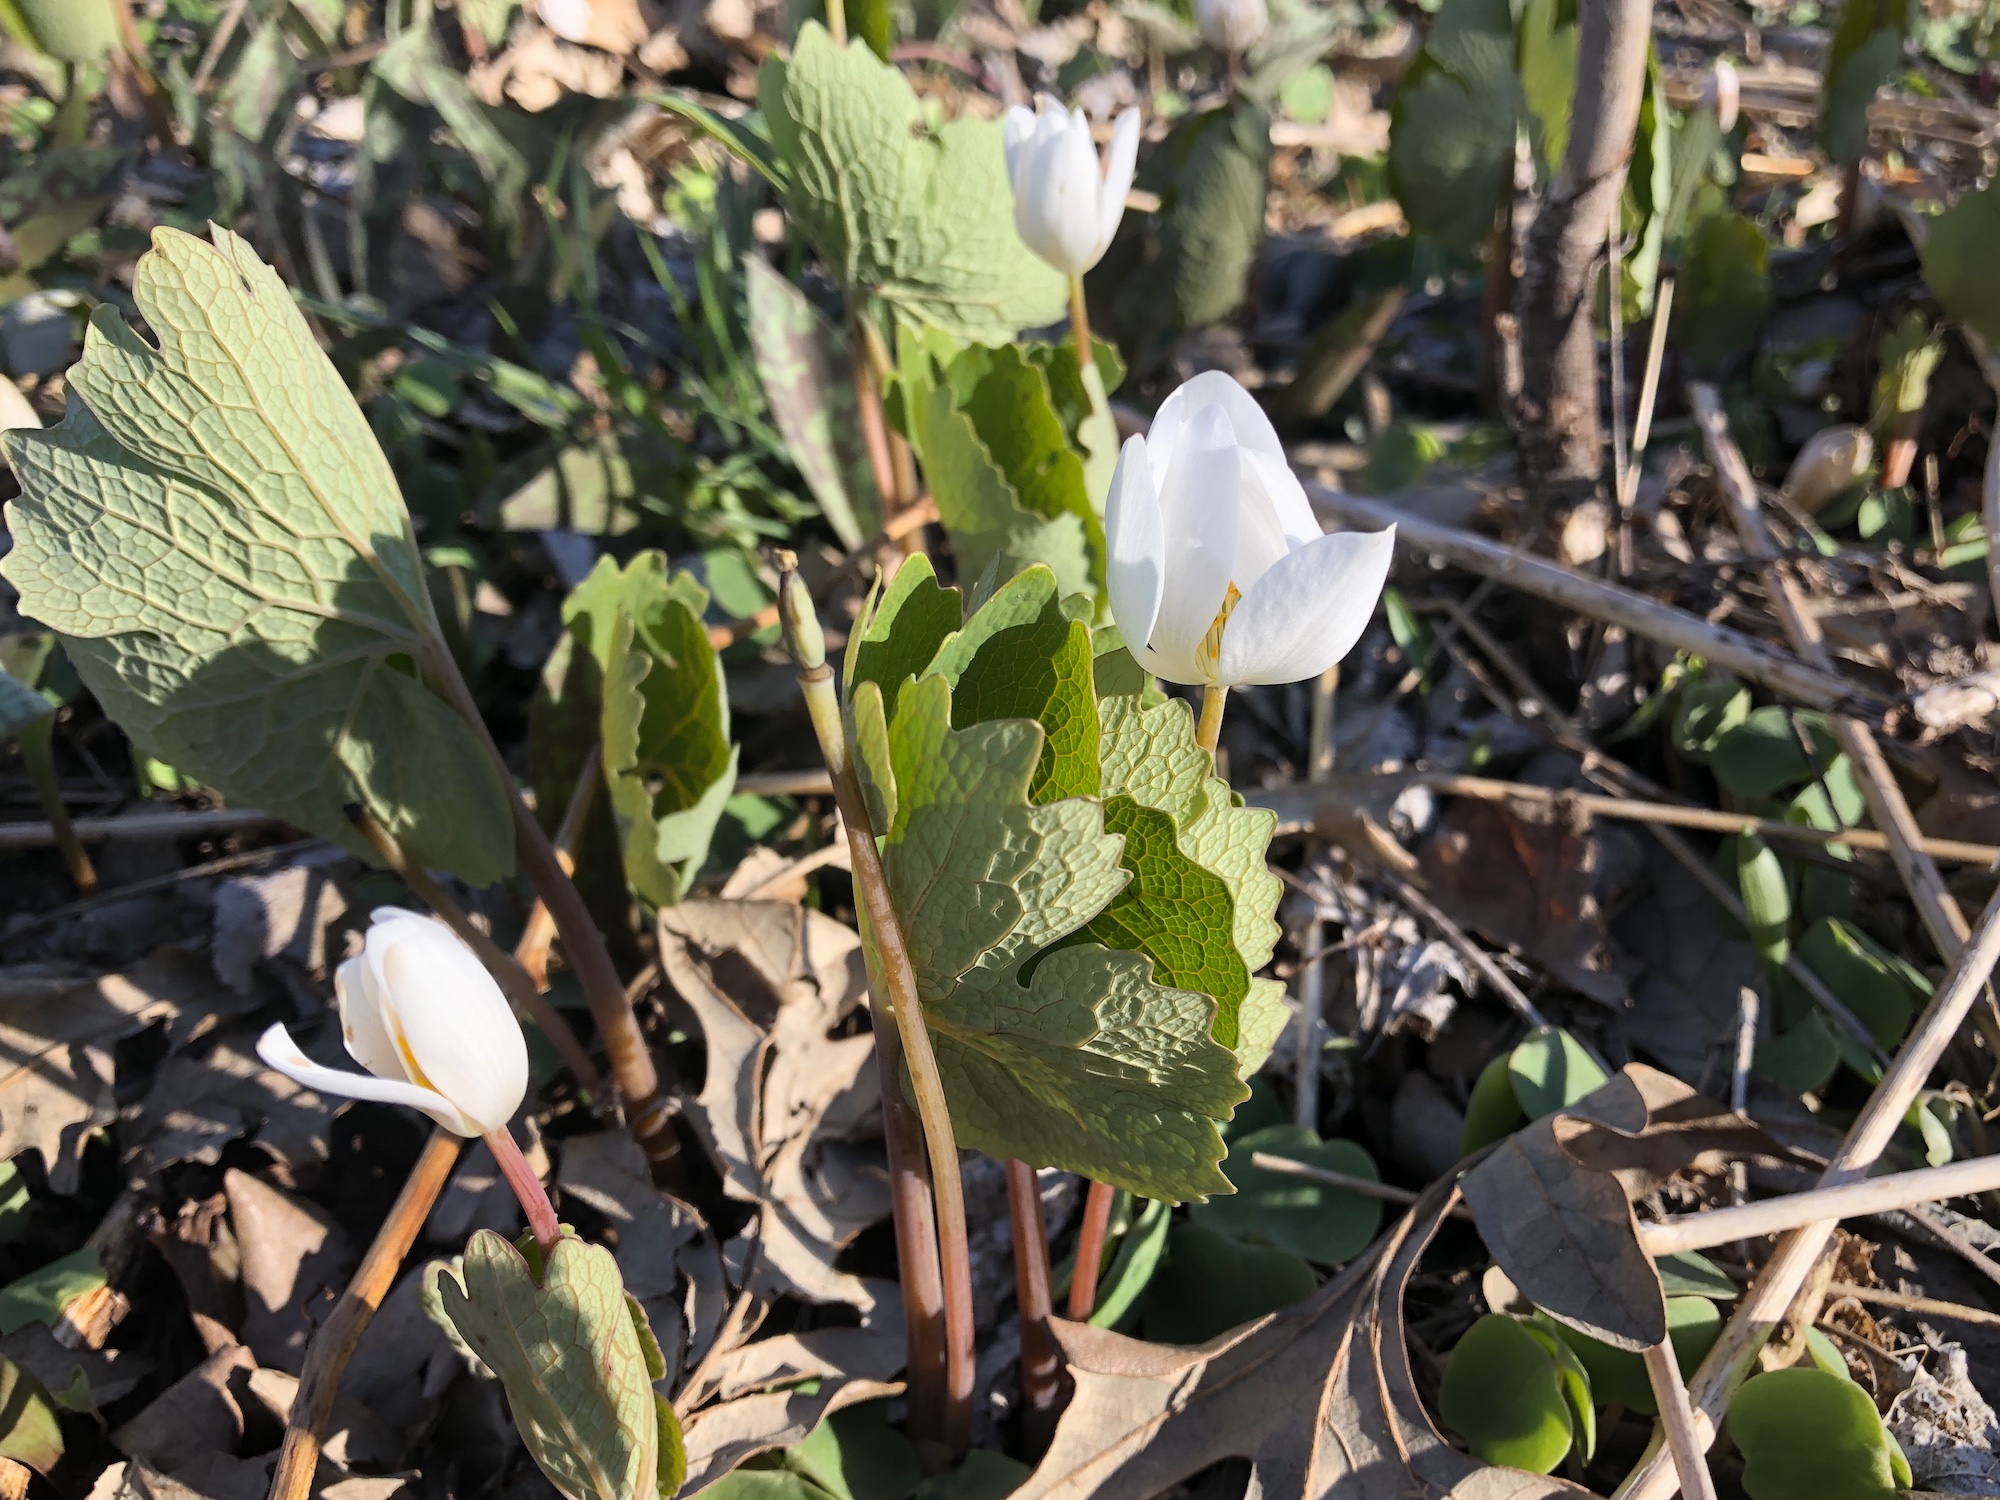 Bloodroot in Oak Savanna by Council Ring in Madison, Wisconsin on April 19, 2020.